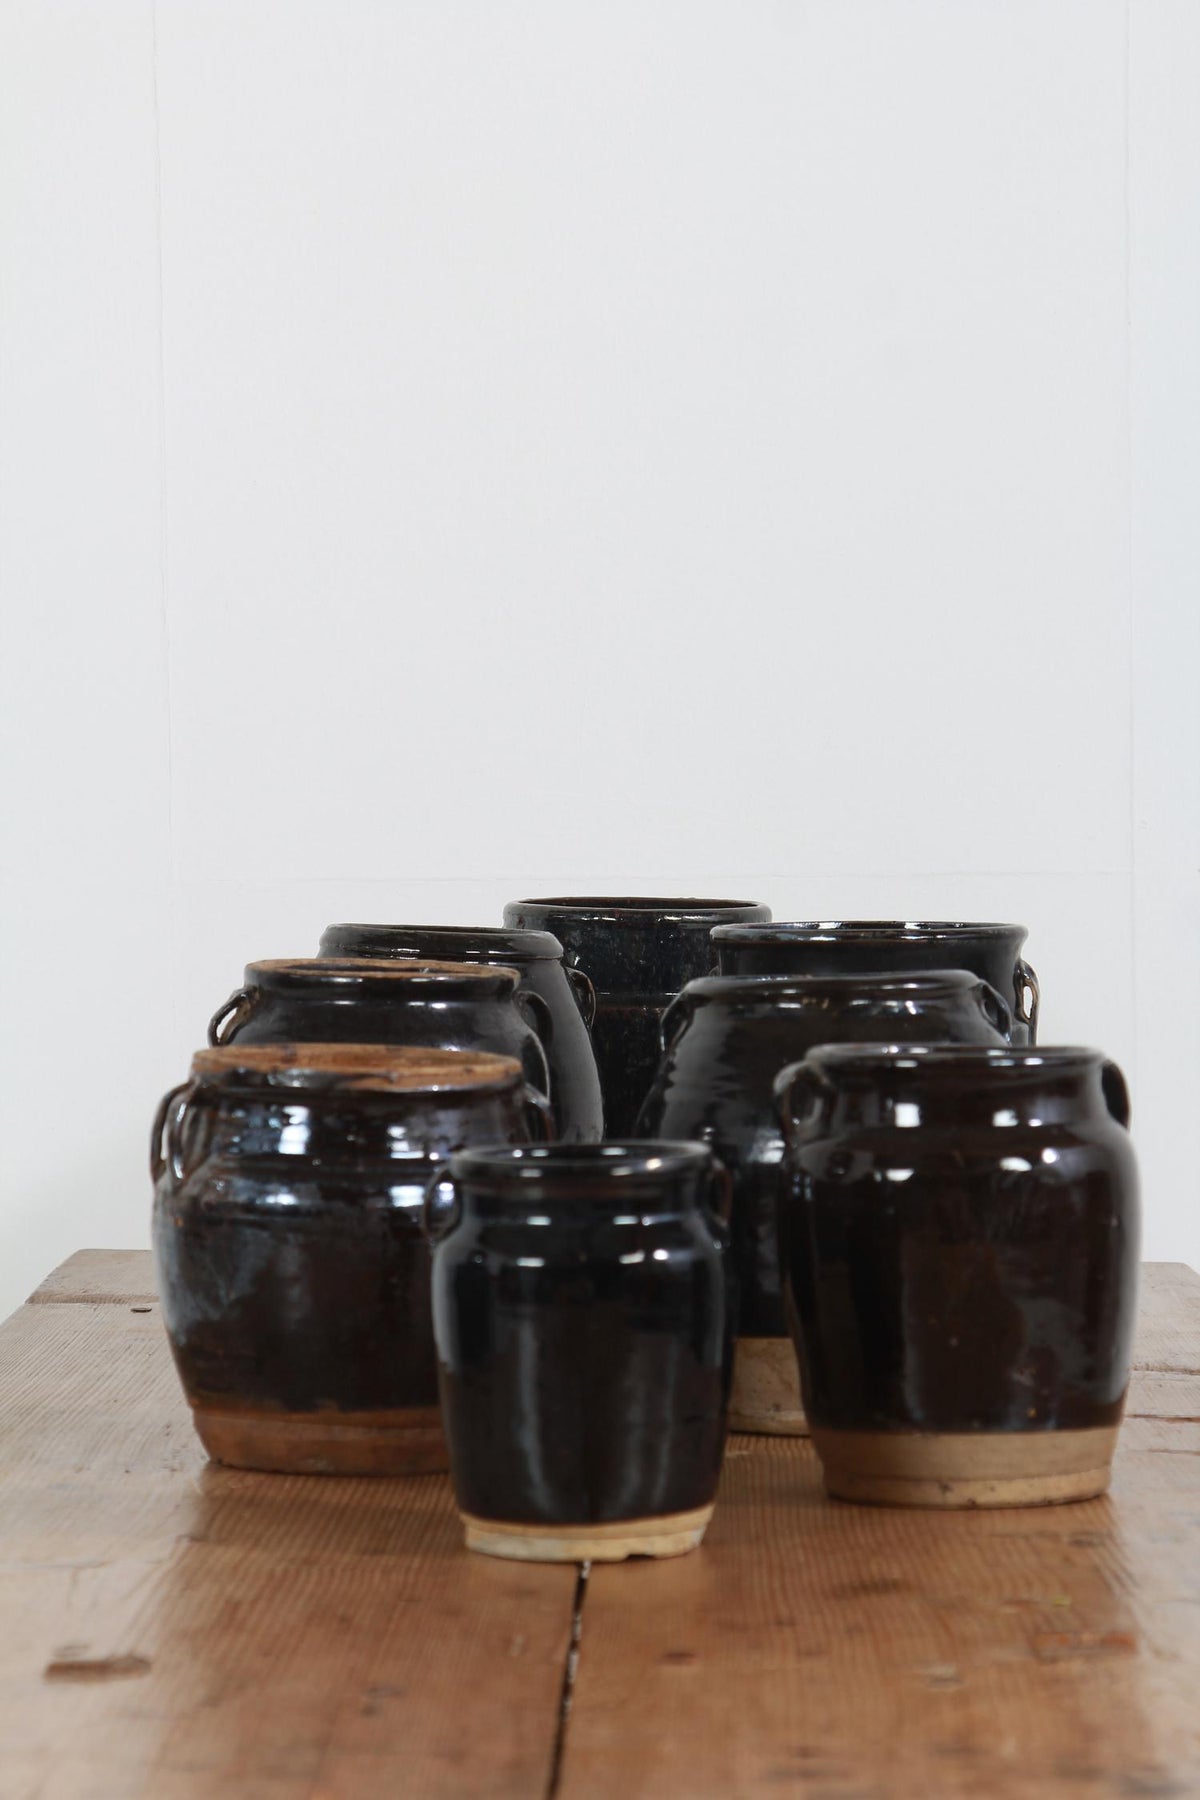 Collection of Chinese Antique Glazed Pottery Jars